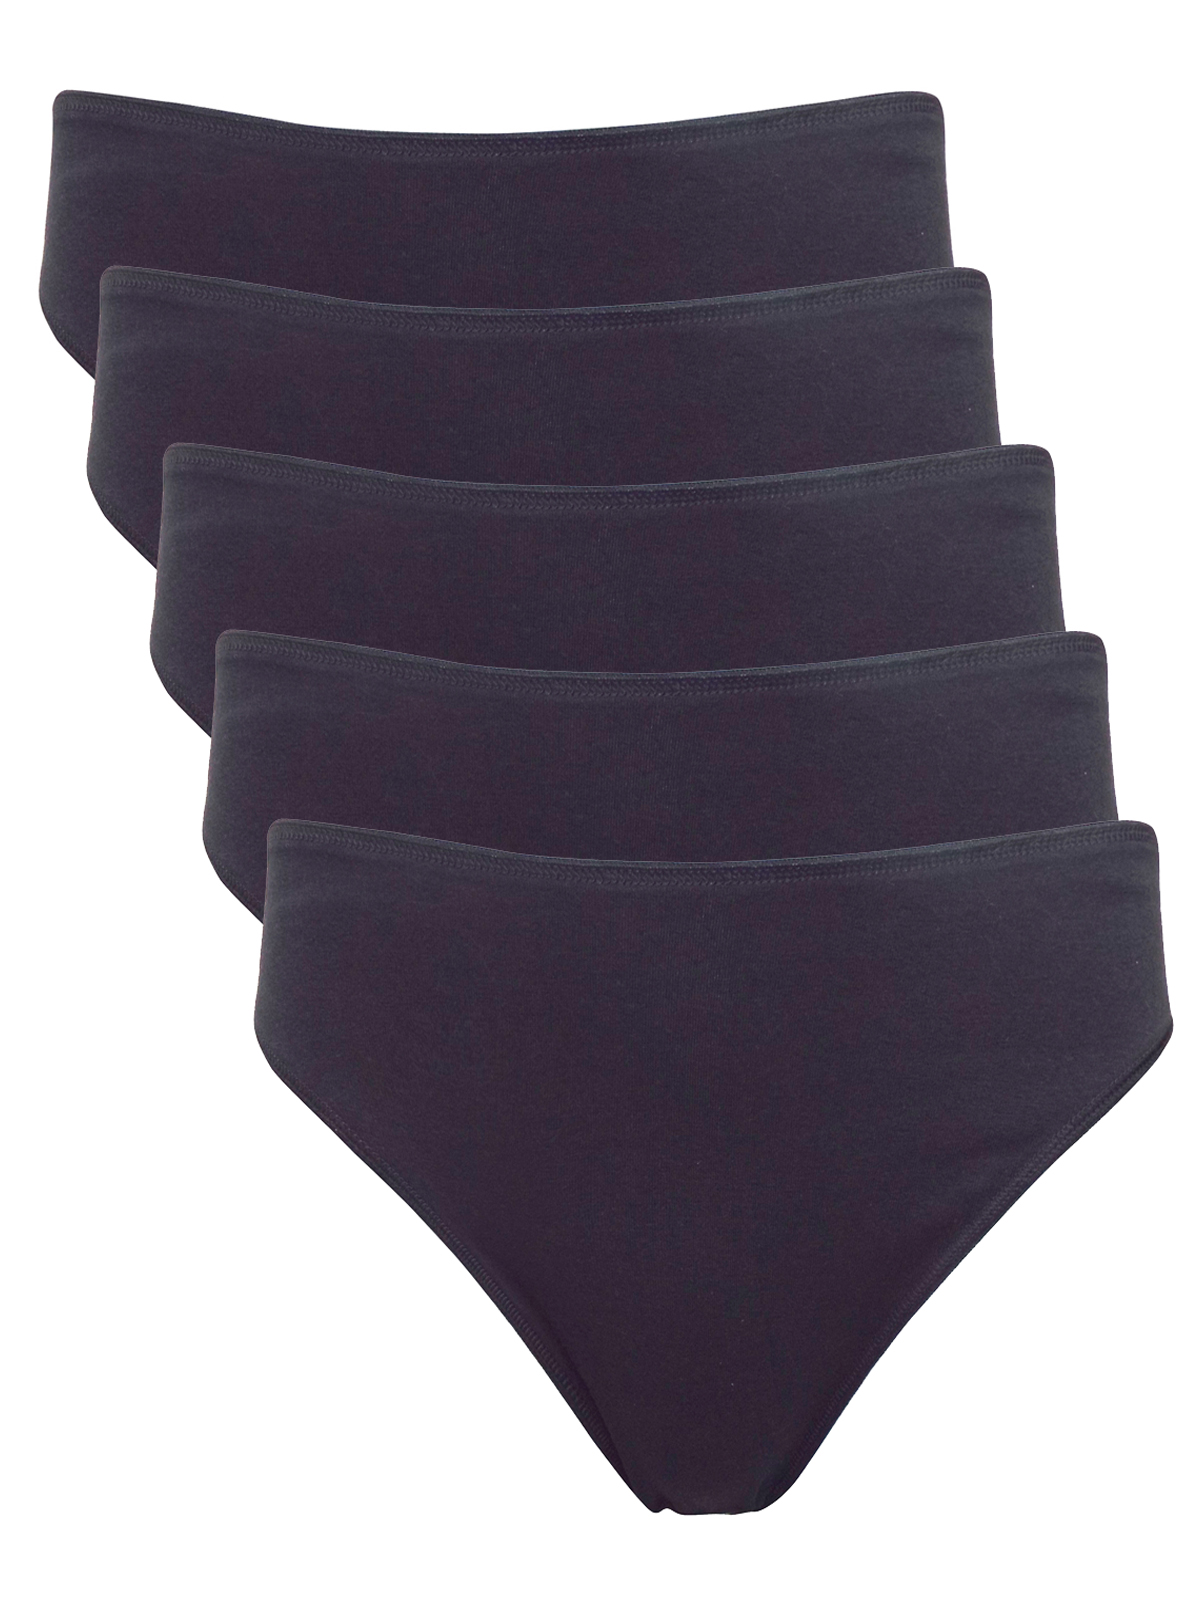 George - - BLACK 5-Pack Plain High Leg Knickers - Size 8 to 20